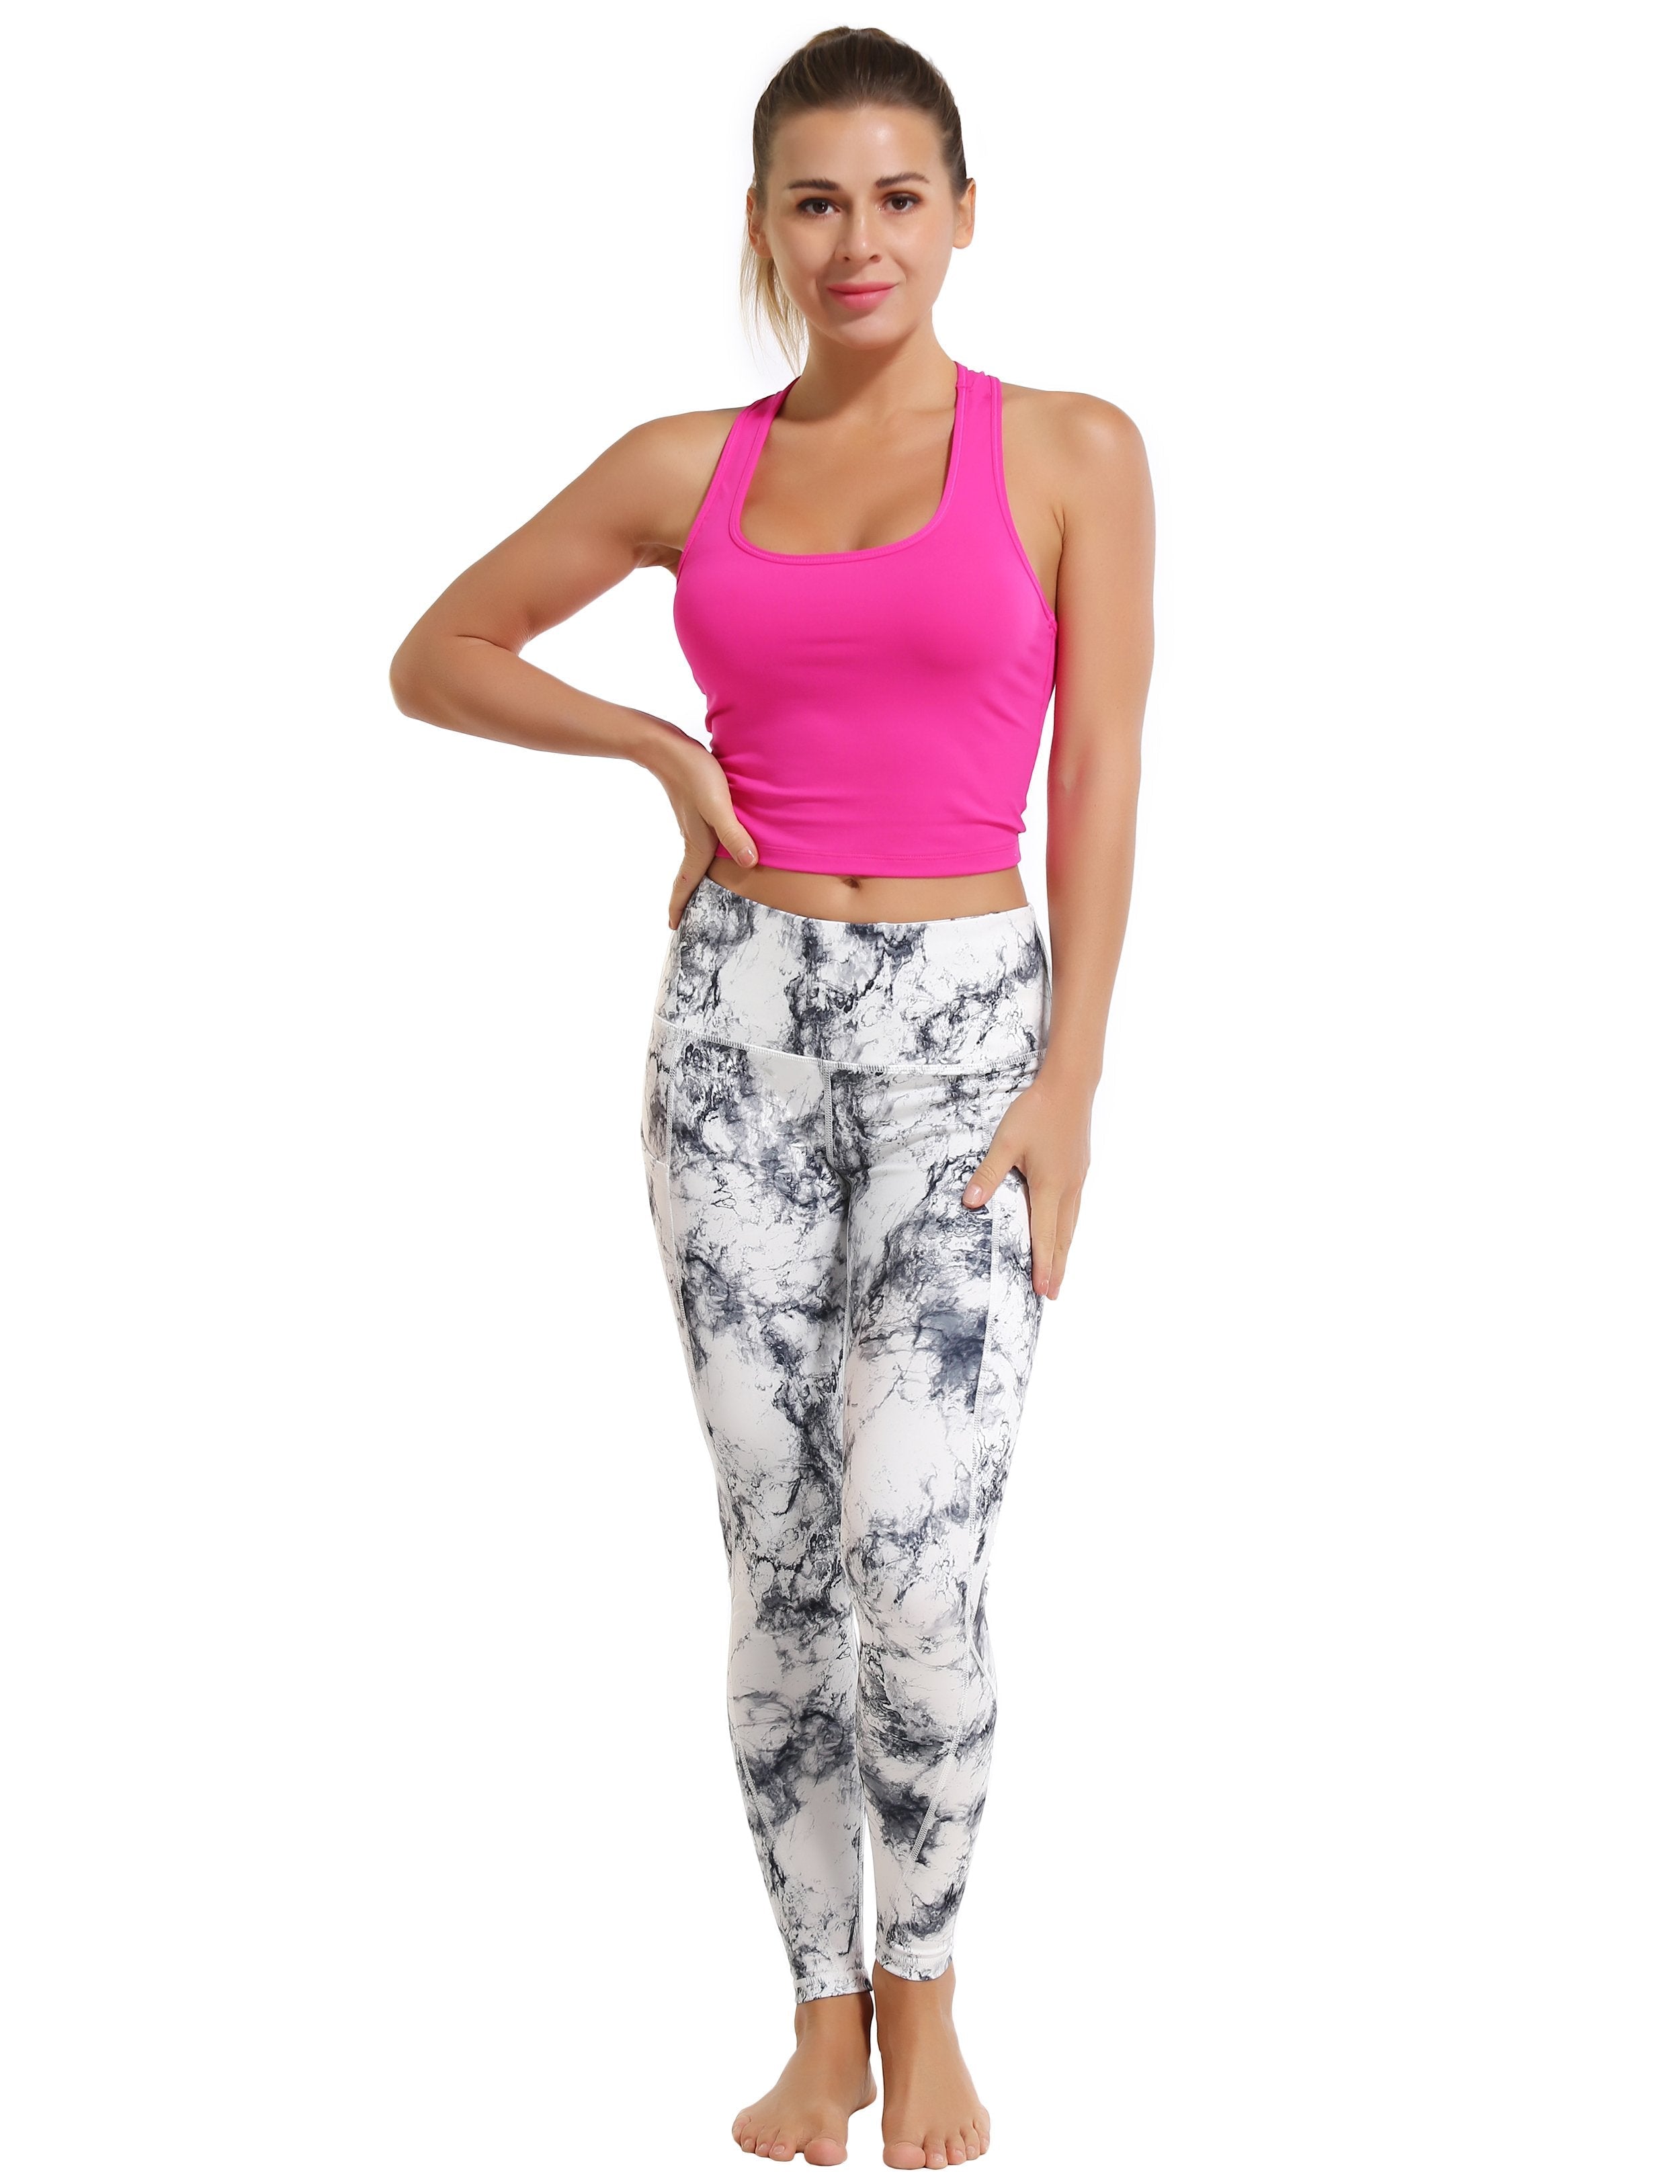 High Waist Side Pockets yogastudio Pants arabescato 78%Polyester/22%Spandex Fabric doesn't attract lint easily 4-way stretch No see-through Moisture-wicking Tummy control Inner pocket